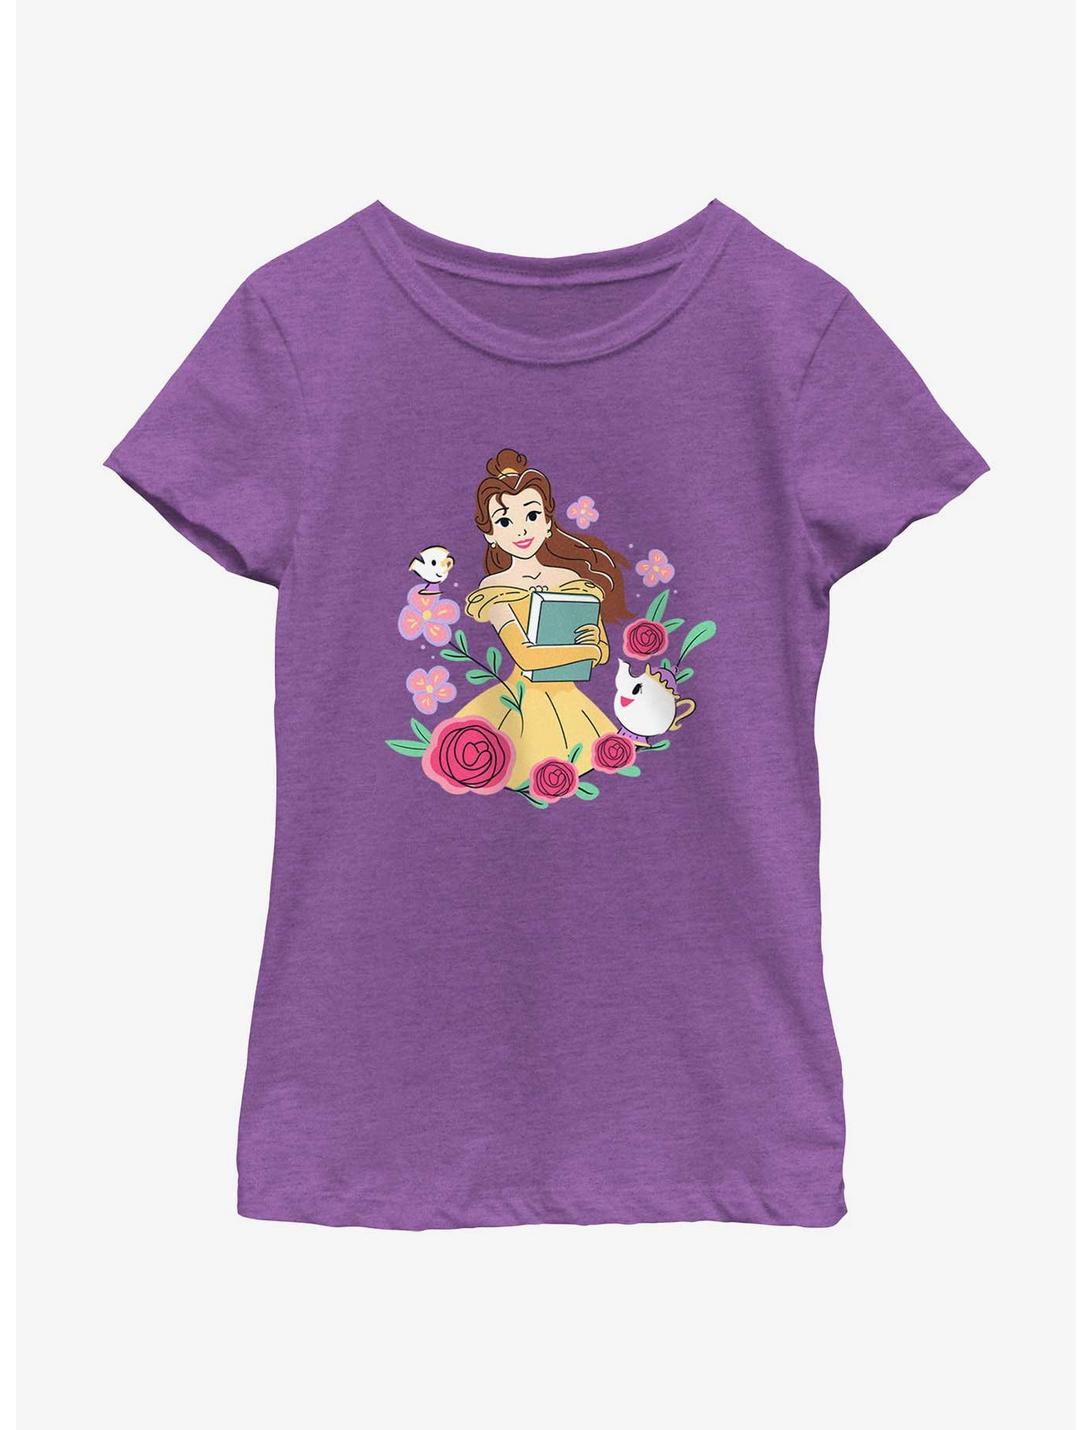 Disney Princesses Belle With Book Youth Girls T-Shirt, PURPLE BERRY, hi-res